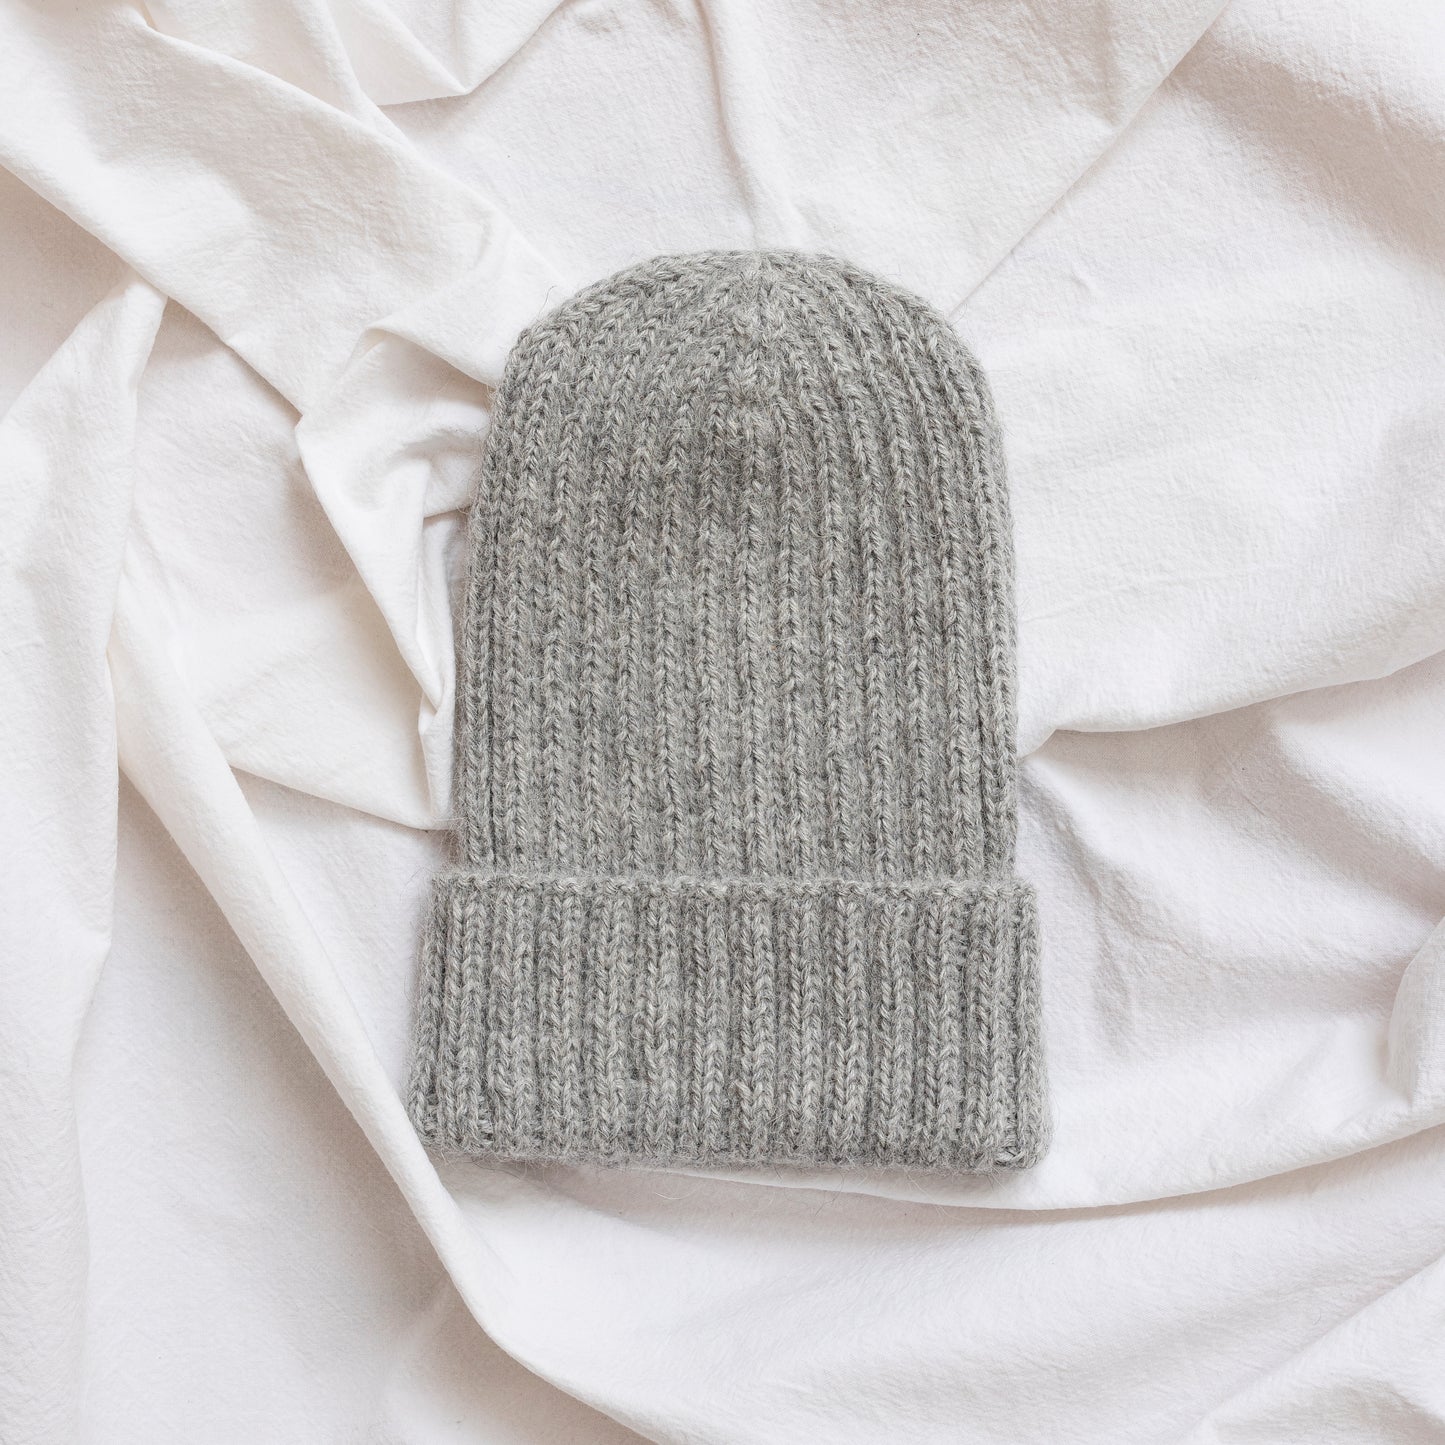 Soft grey coloured soft beanie with rib detail made from alpaca wool.